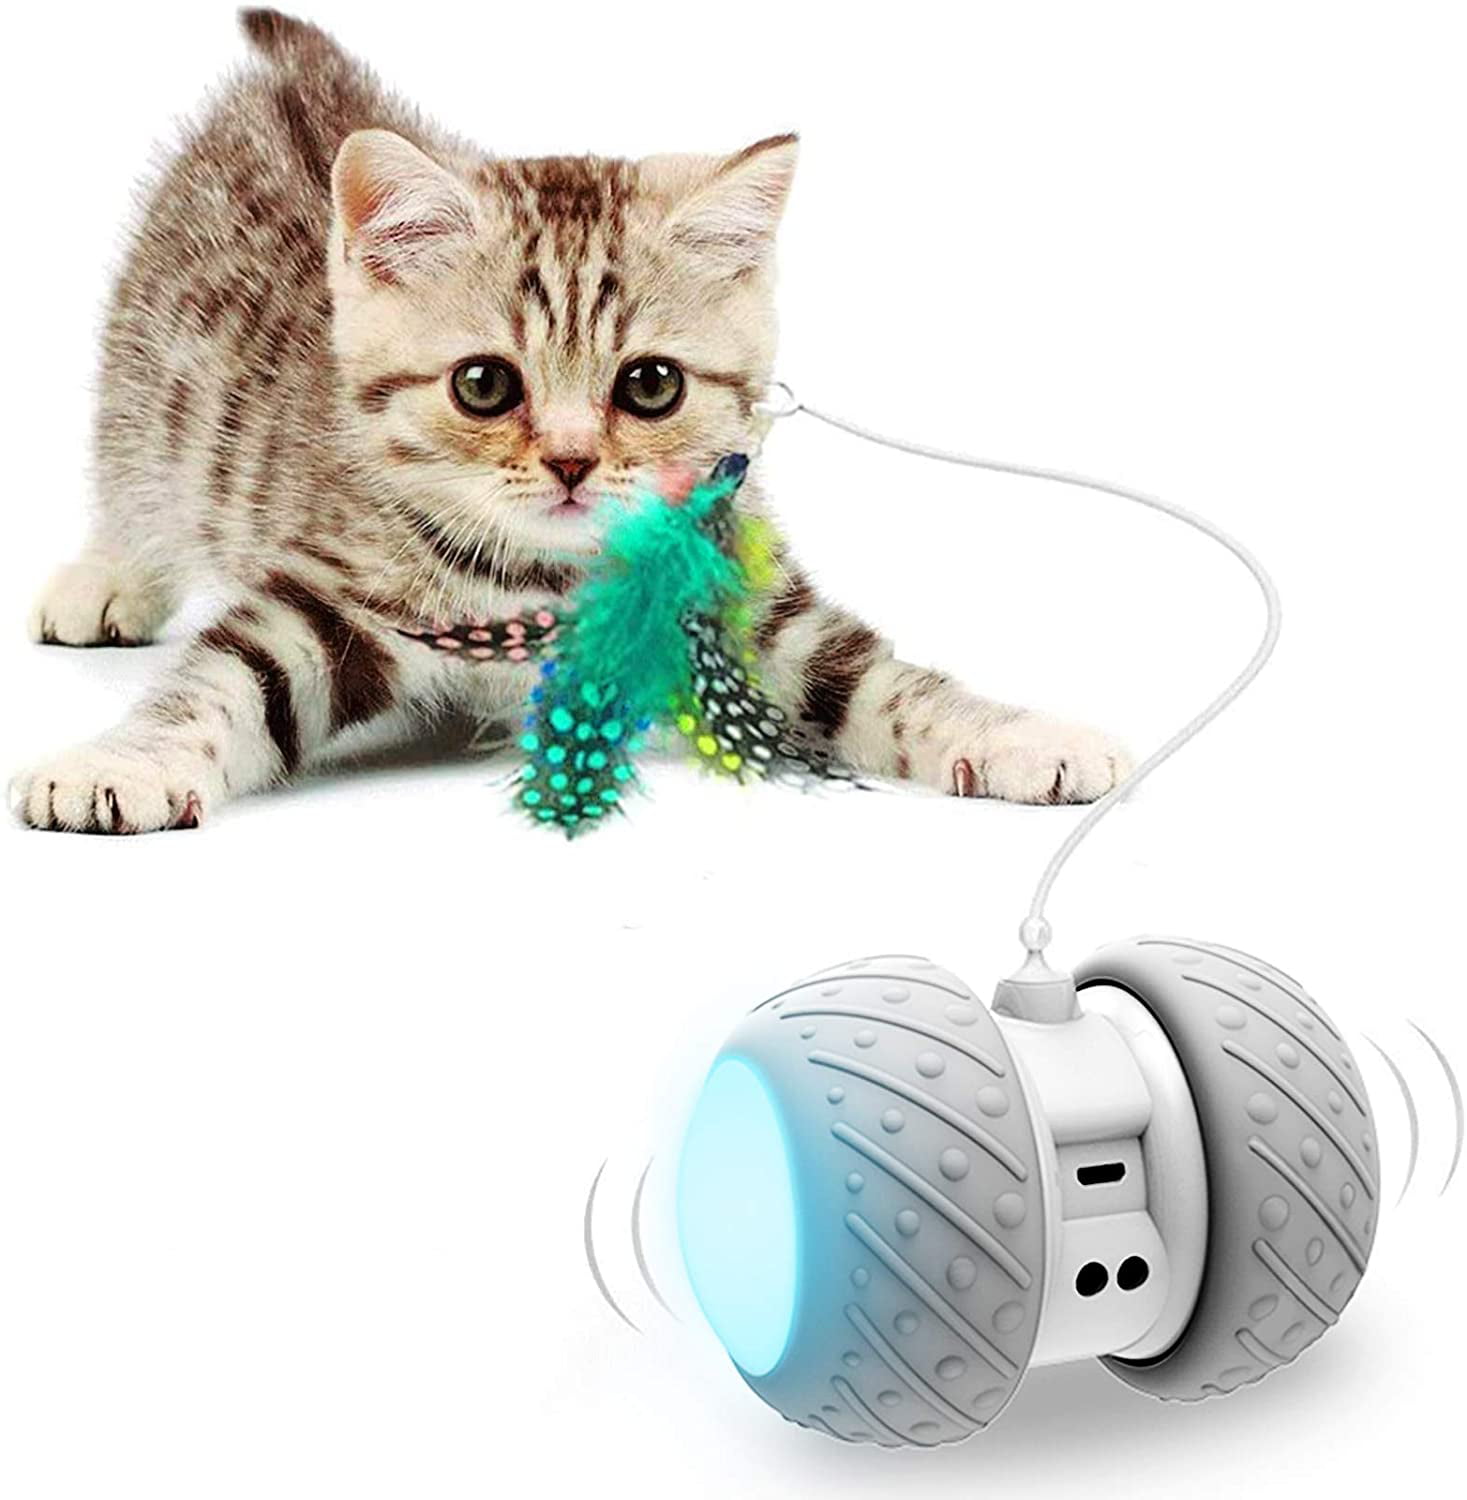 automated cat toys Off 76% - www.sales.sp.gov.br